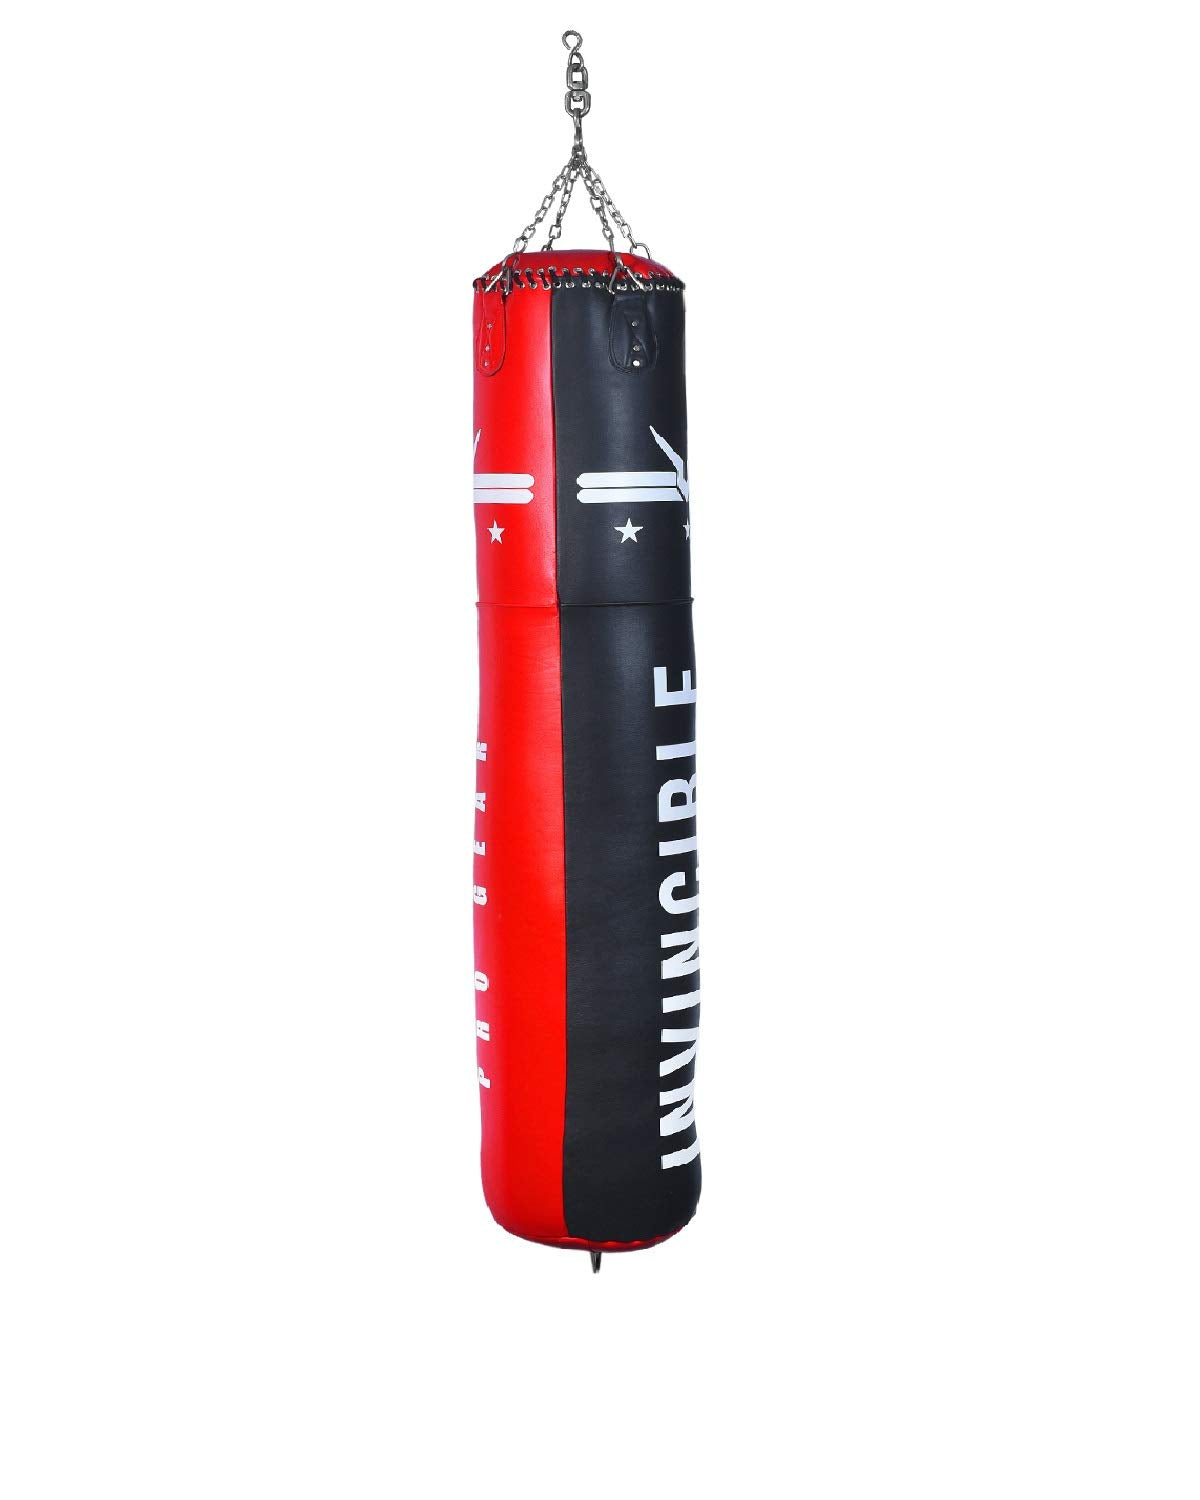 Buy HB Hard Bodies Professional Boxing Punching Bag for Kickboxing, Muay  Thai Along with Hanging Chain & Boxing Gloves (Red, 4 Feet) Online at Low  Prices in India - Amazon.in